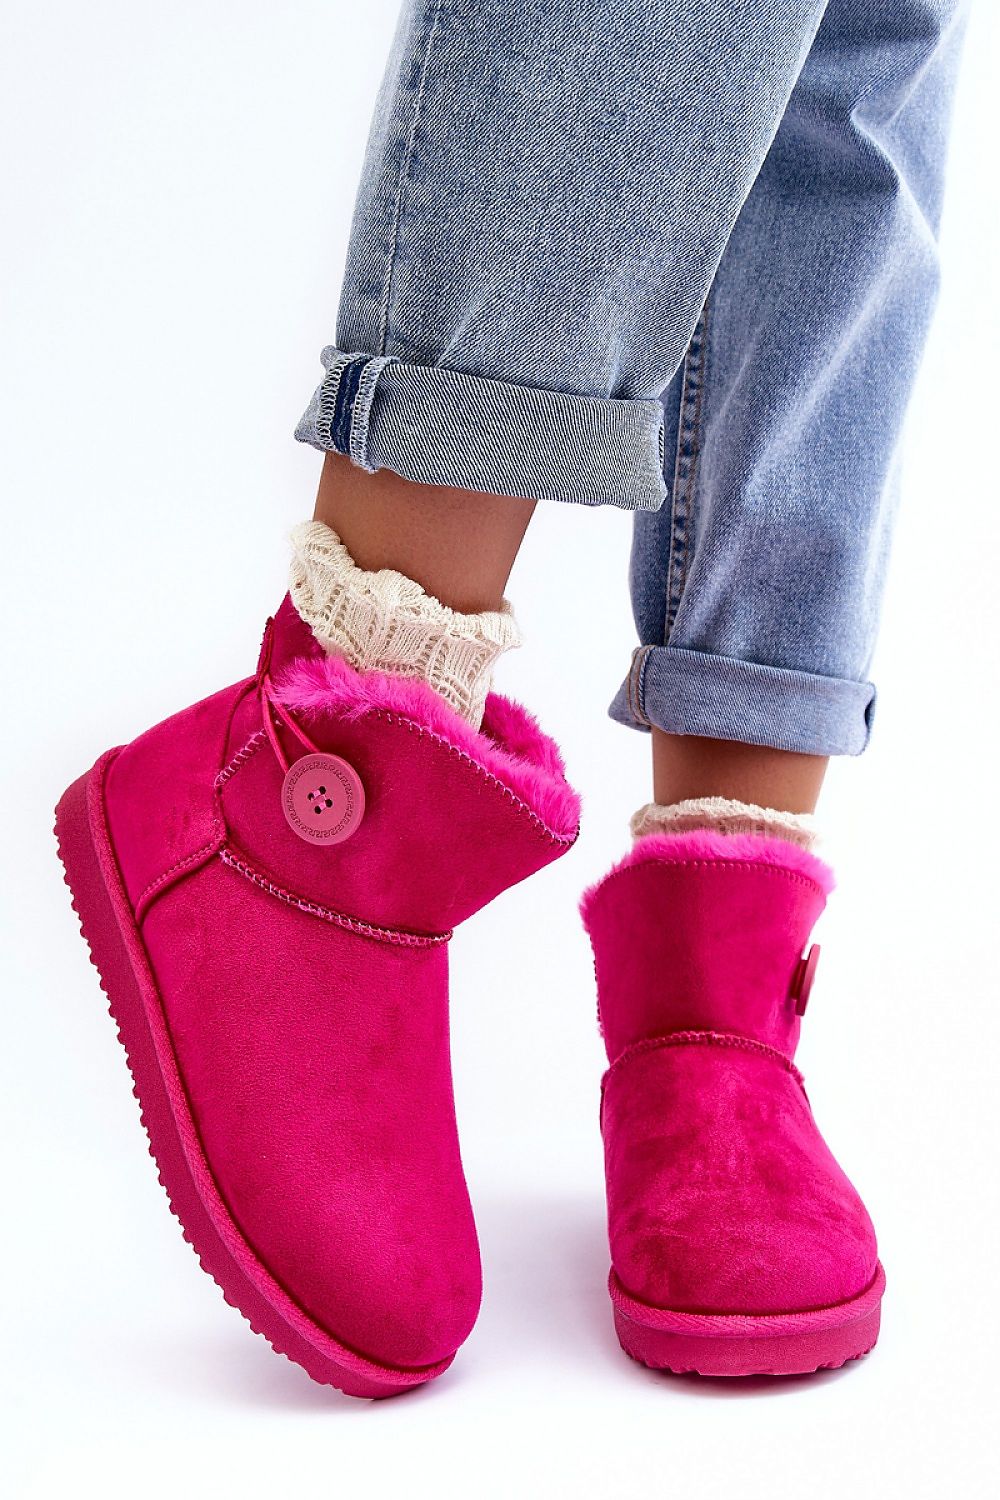 Autumn & Winter Fashionable Pink Snow Boots Insulated With Thick Fur